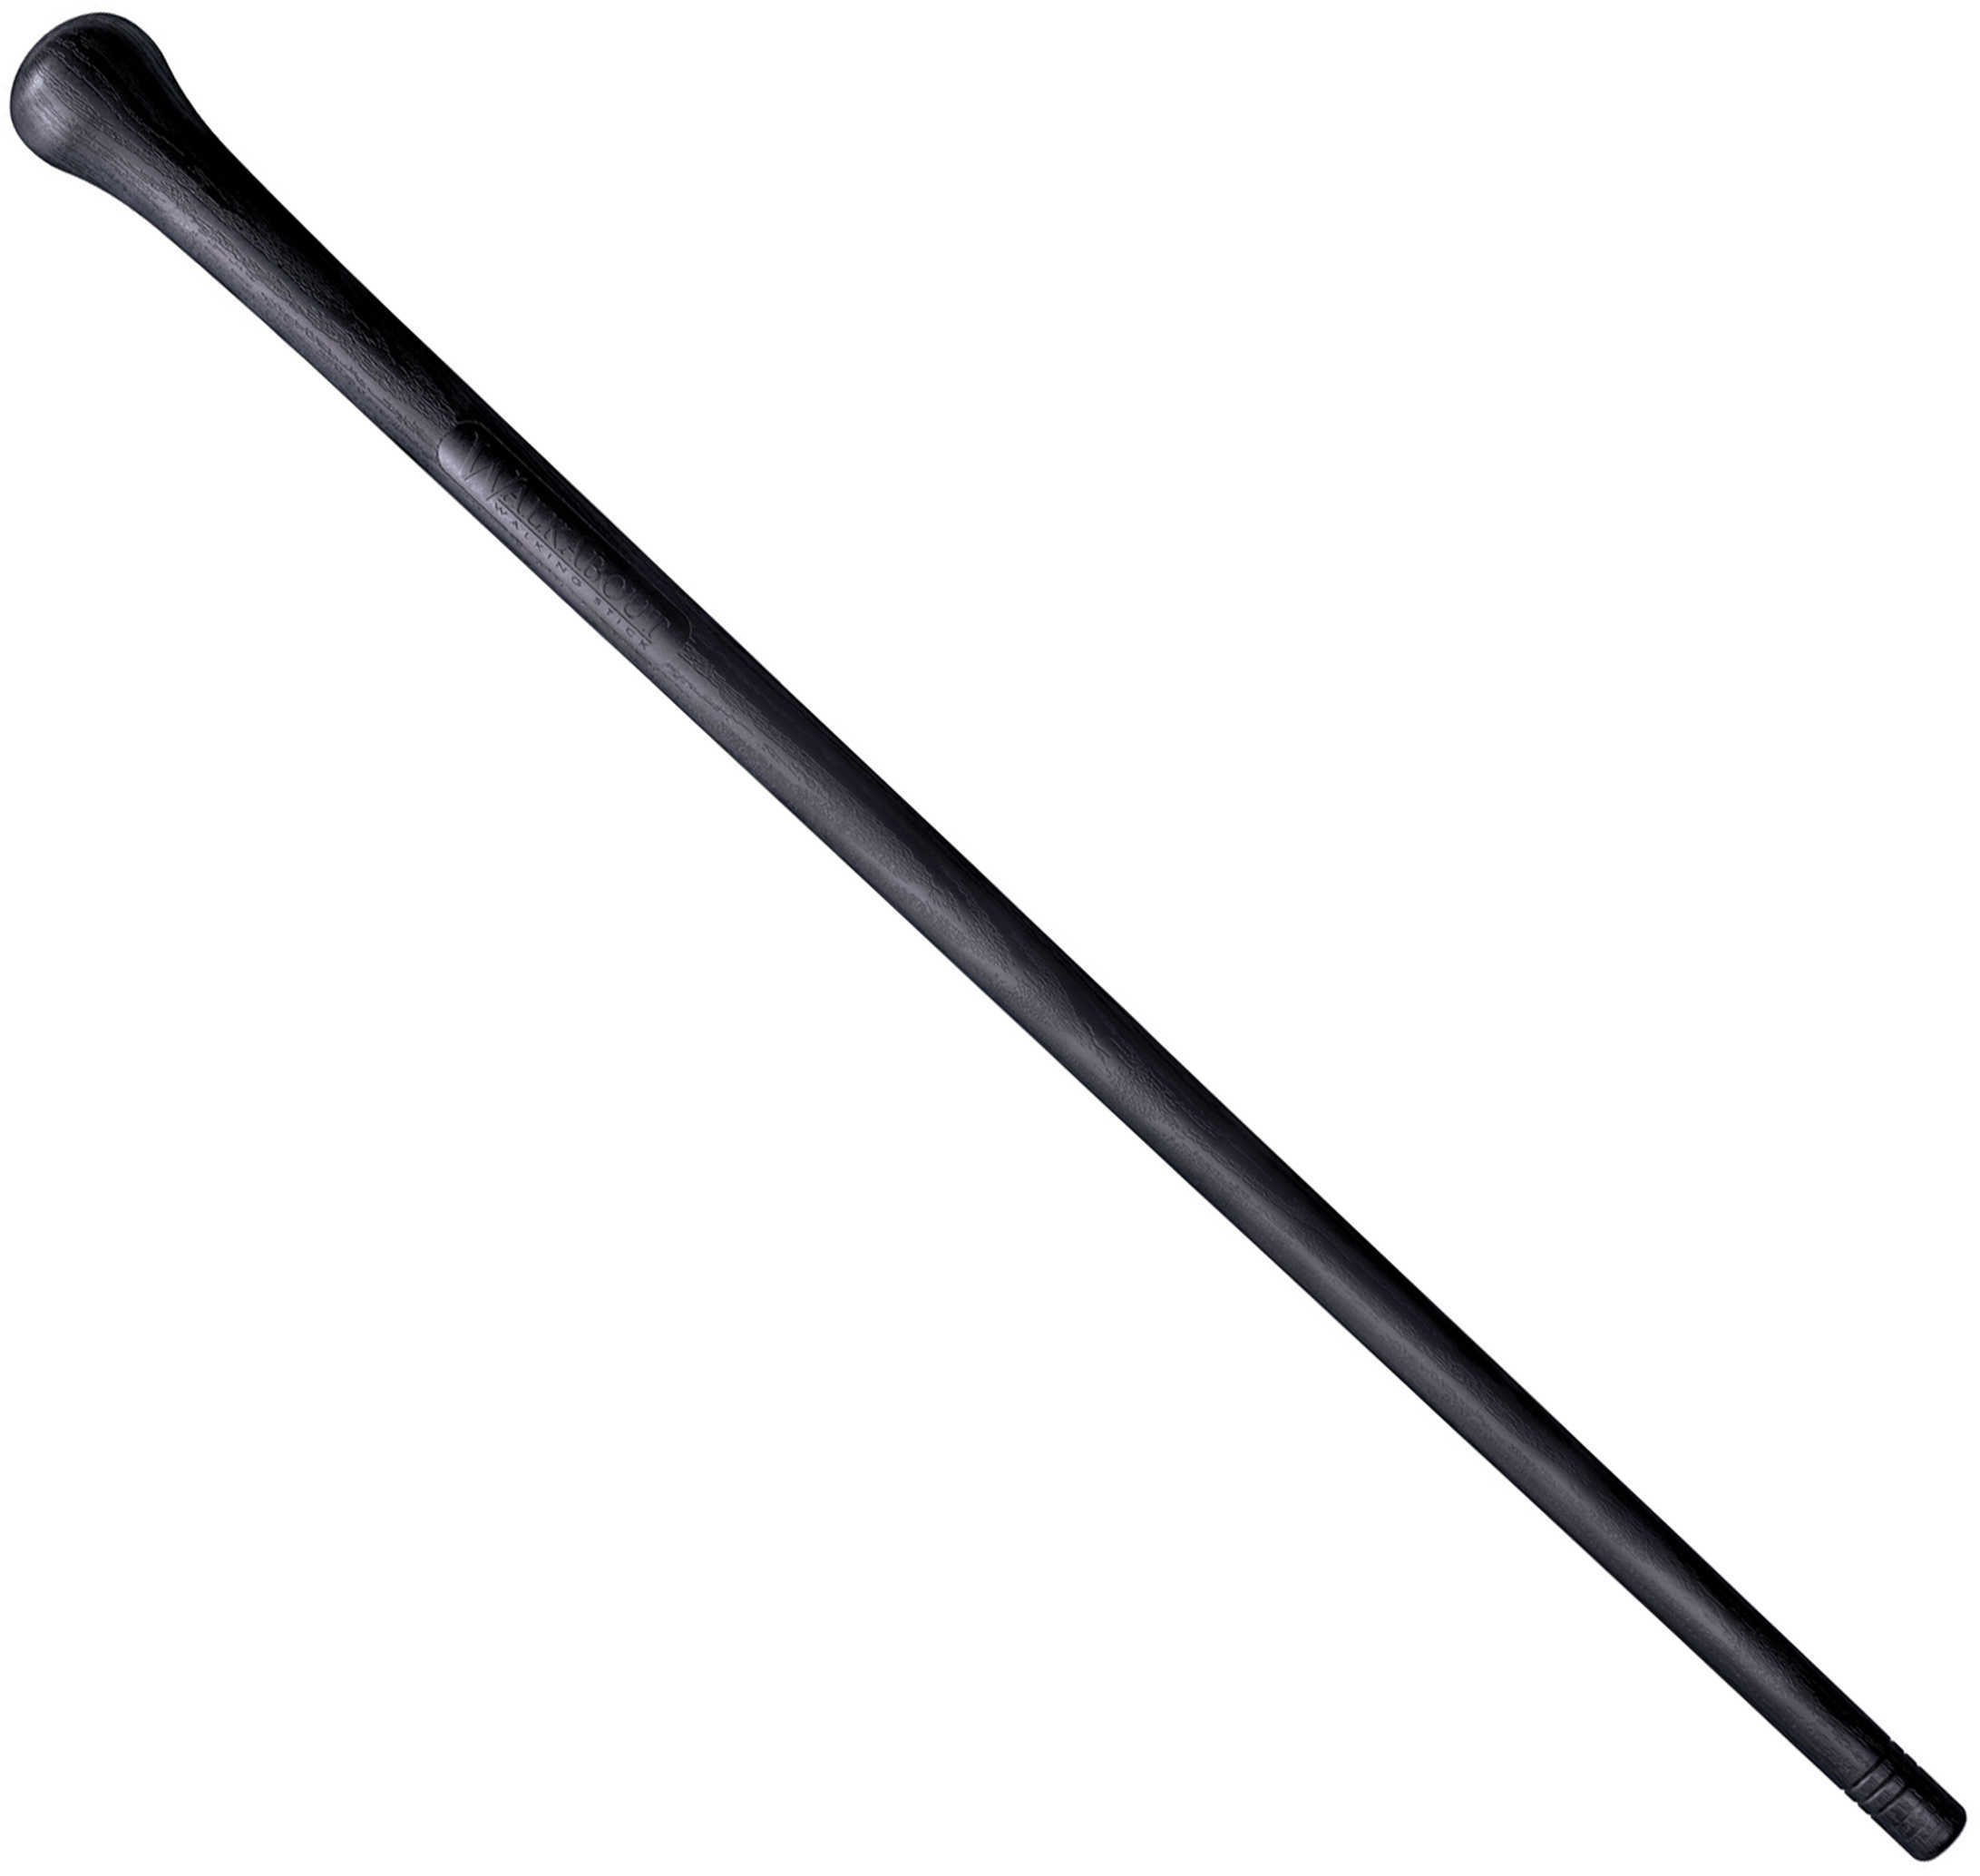 Cold Cs-91Walk Walkabout Stick / 38.5" Overall